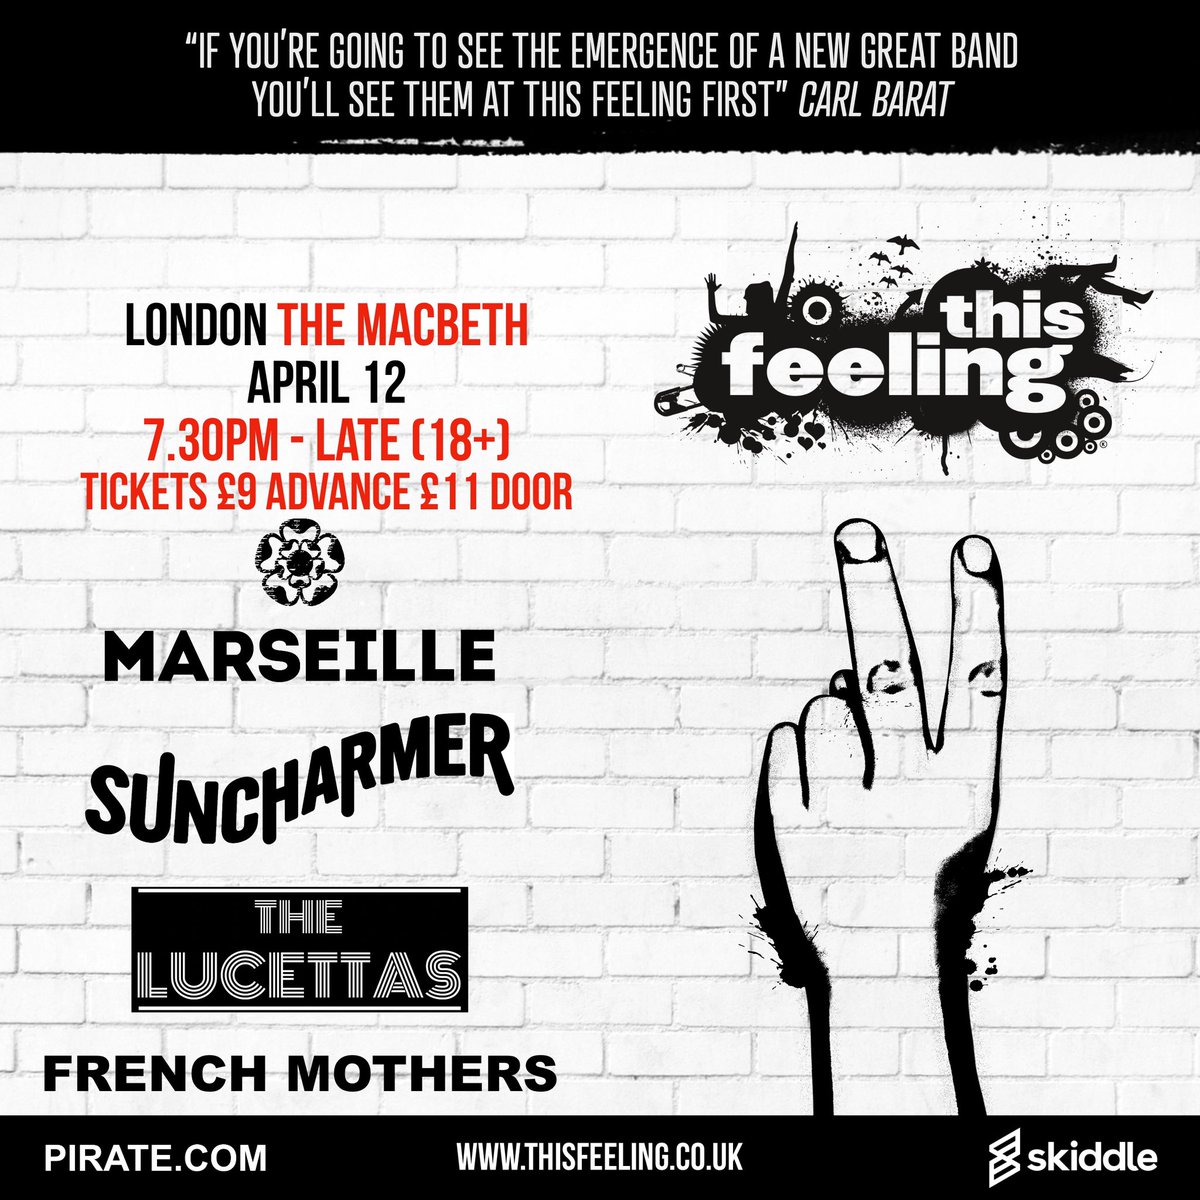 🚨 LONDON LETS GO 🚨 - We are back! Buzzing to announce that on Friday 12th April we will be playing at The Macbeth, London with @This_Feeling - Some absolutely class bands on the bill as well! Grab your tickets here: skiddle.com/e/38070892 we can’t wait to see yous there ✌🏻